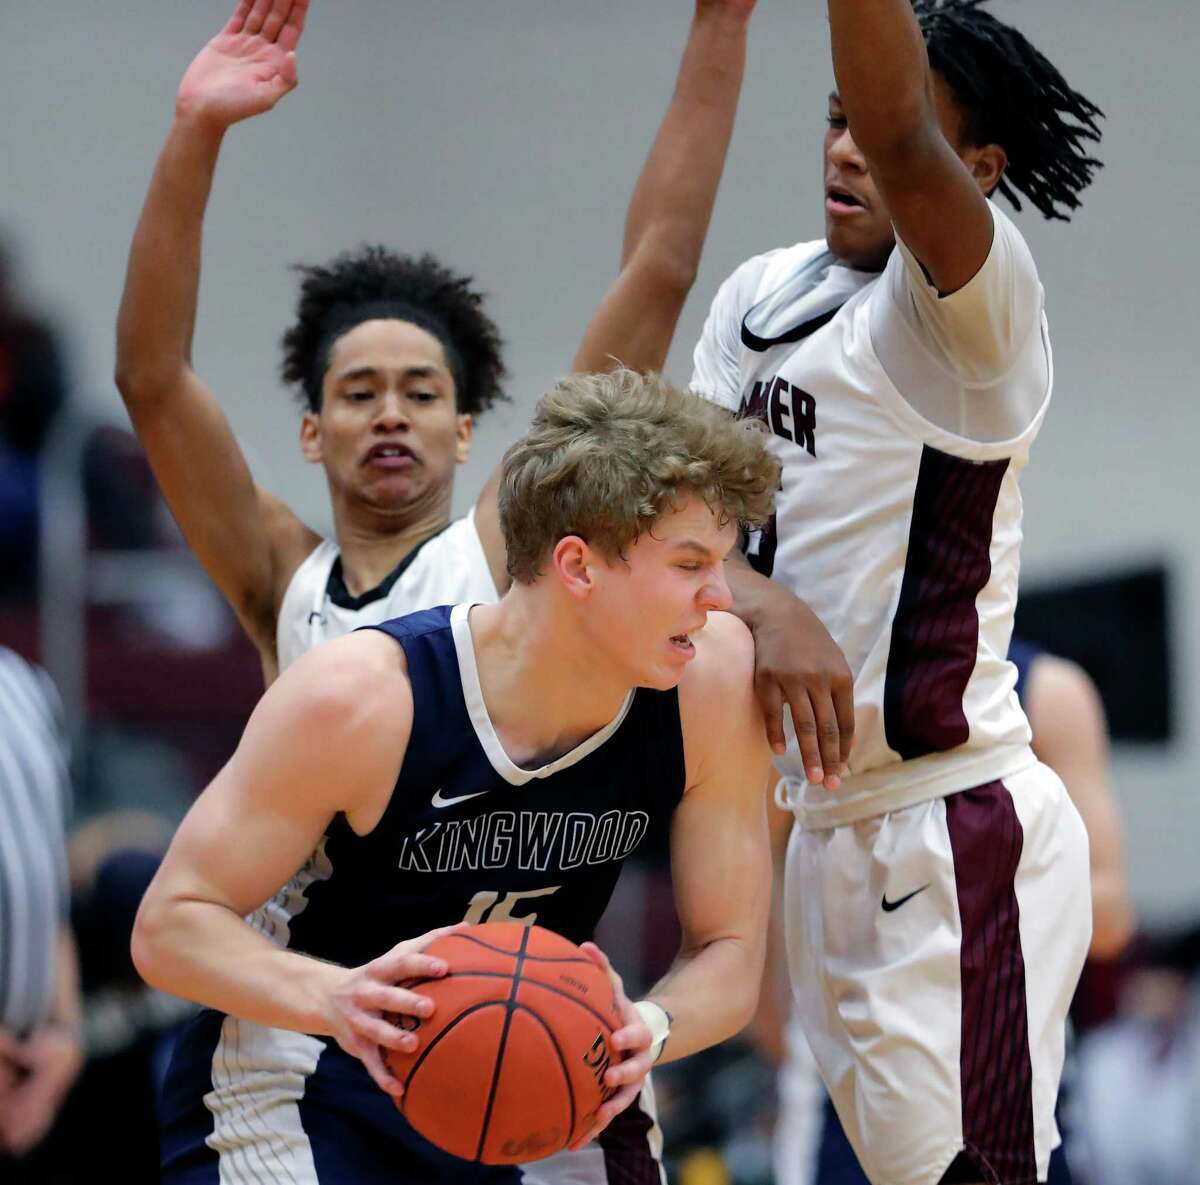 Kingwood’s Tommy Neuman, middle, looks for way around Summer Creek’s Elijah Roman, left, and Corey Nichols, right, during the second half of a high school basketball game Wednesday, Feb. 9, 2022 in Houston, TX.